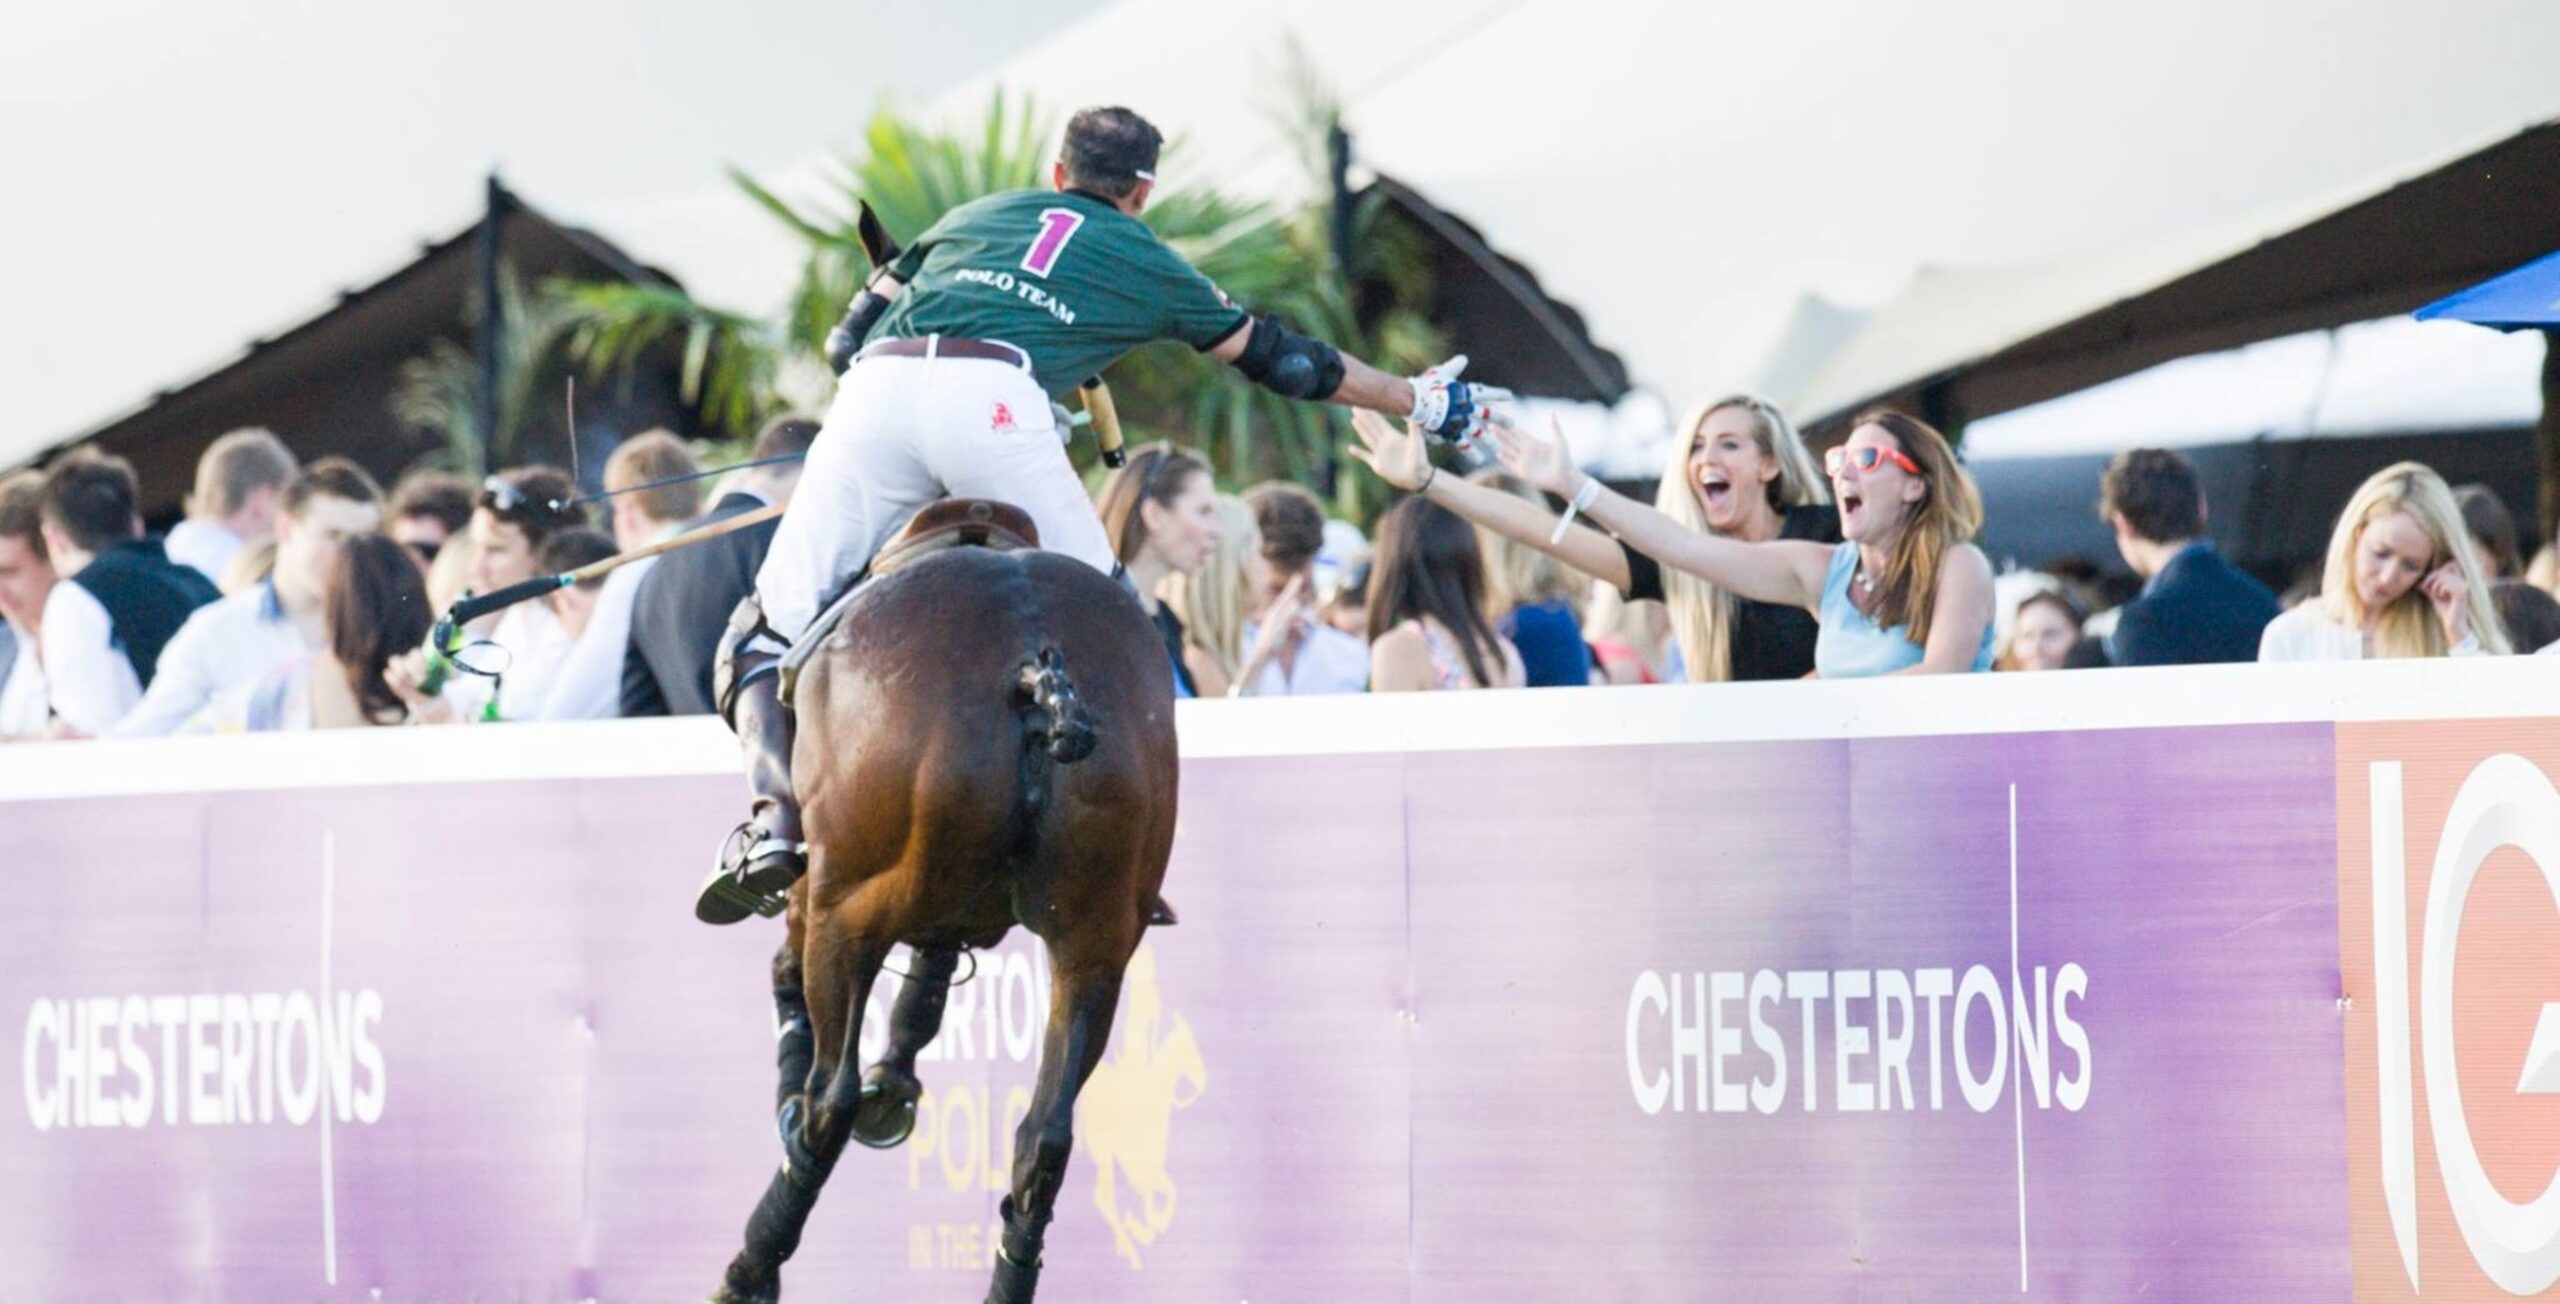 Chestertons Polo in the Park: A Quintessentially British Affair